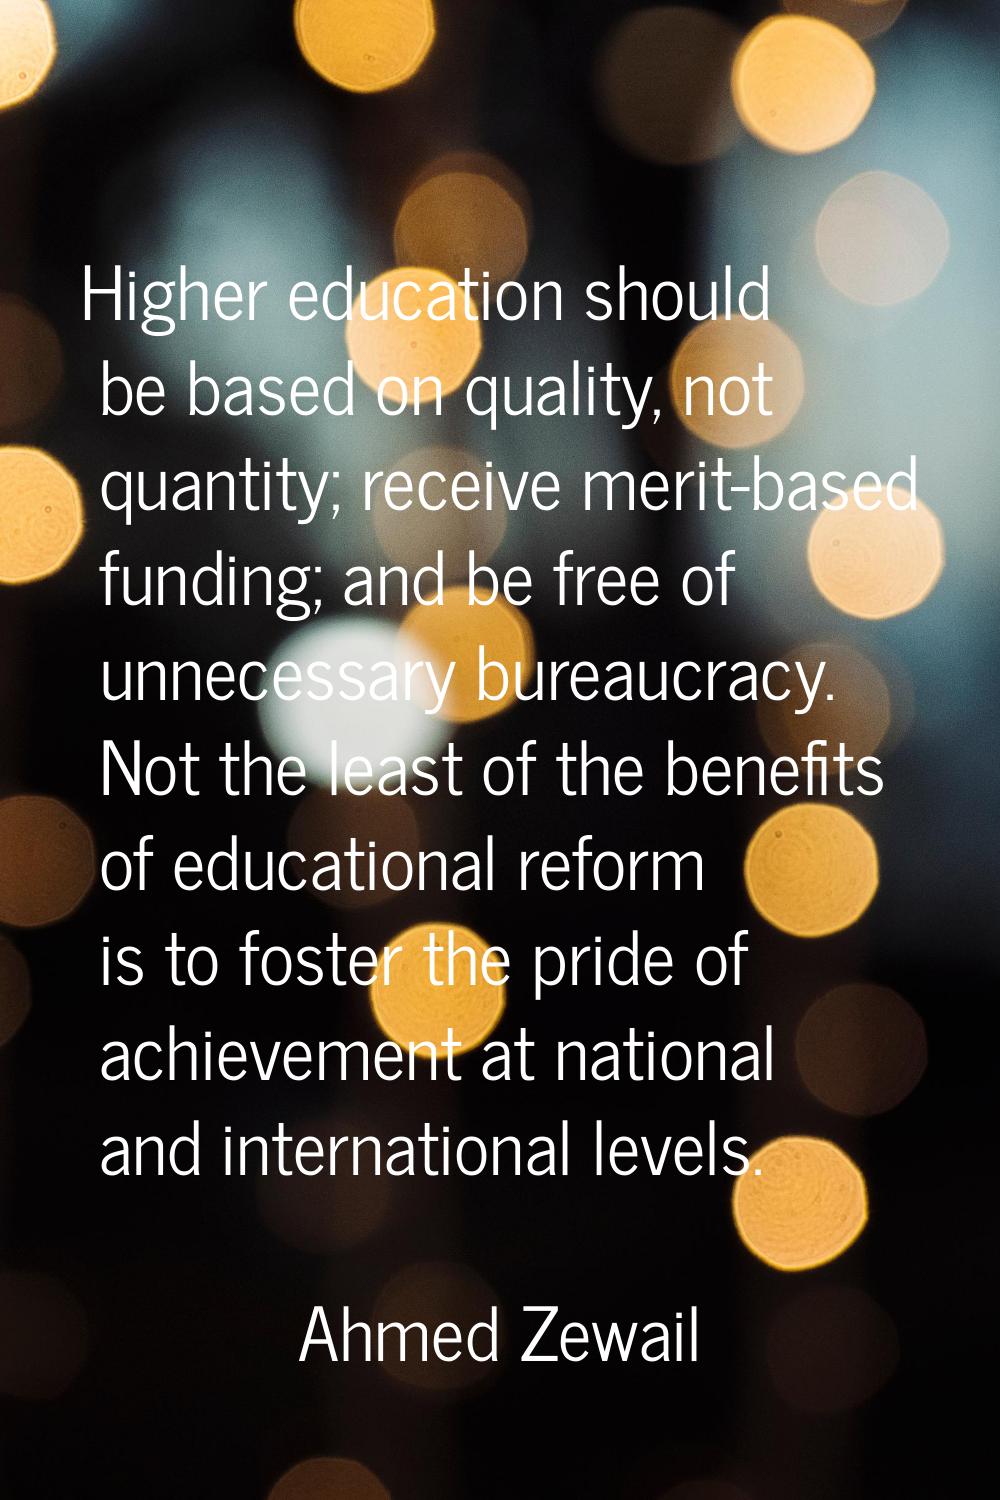 Higher education should be based on quality, not quantity; receive merit-based funding; and be free